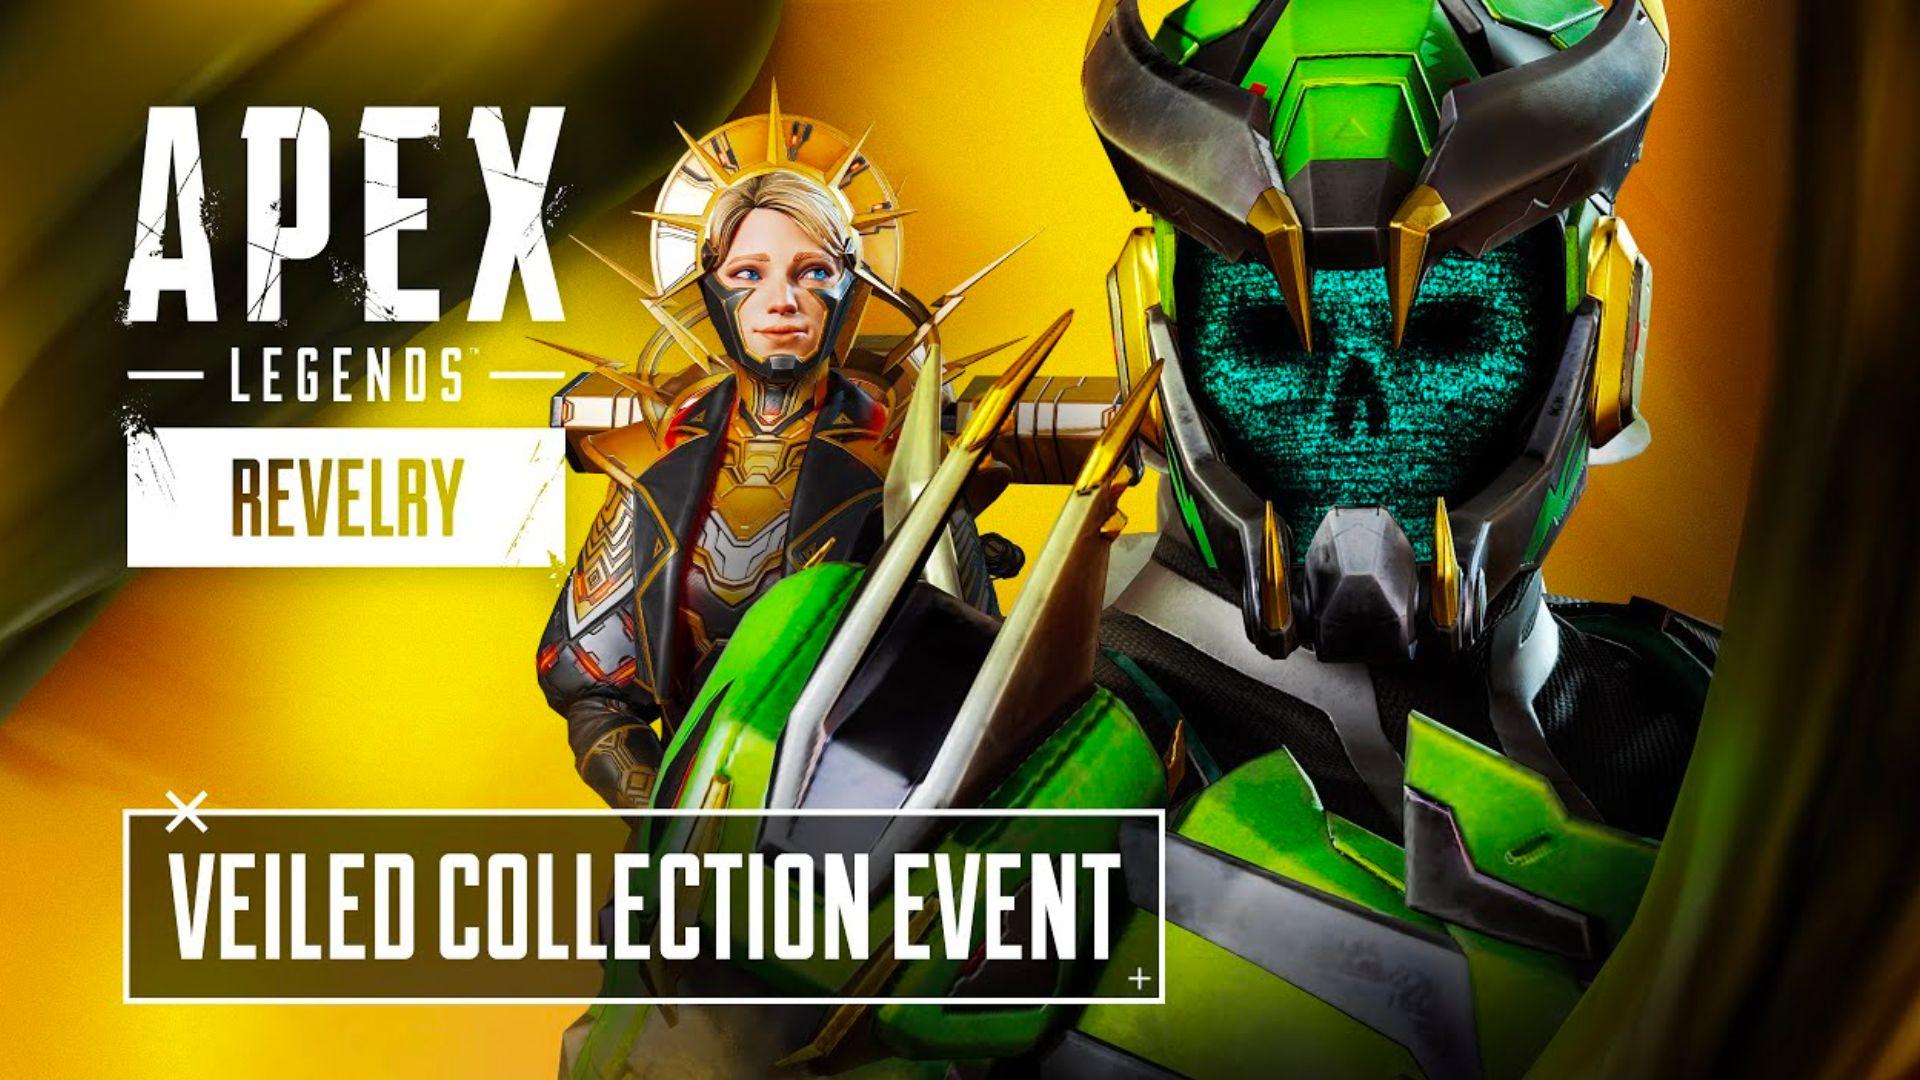 Apex Legends veiled collection event image with new skins and logo